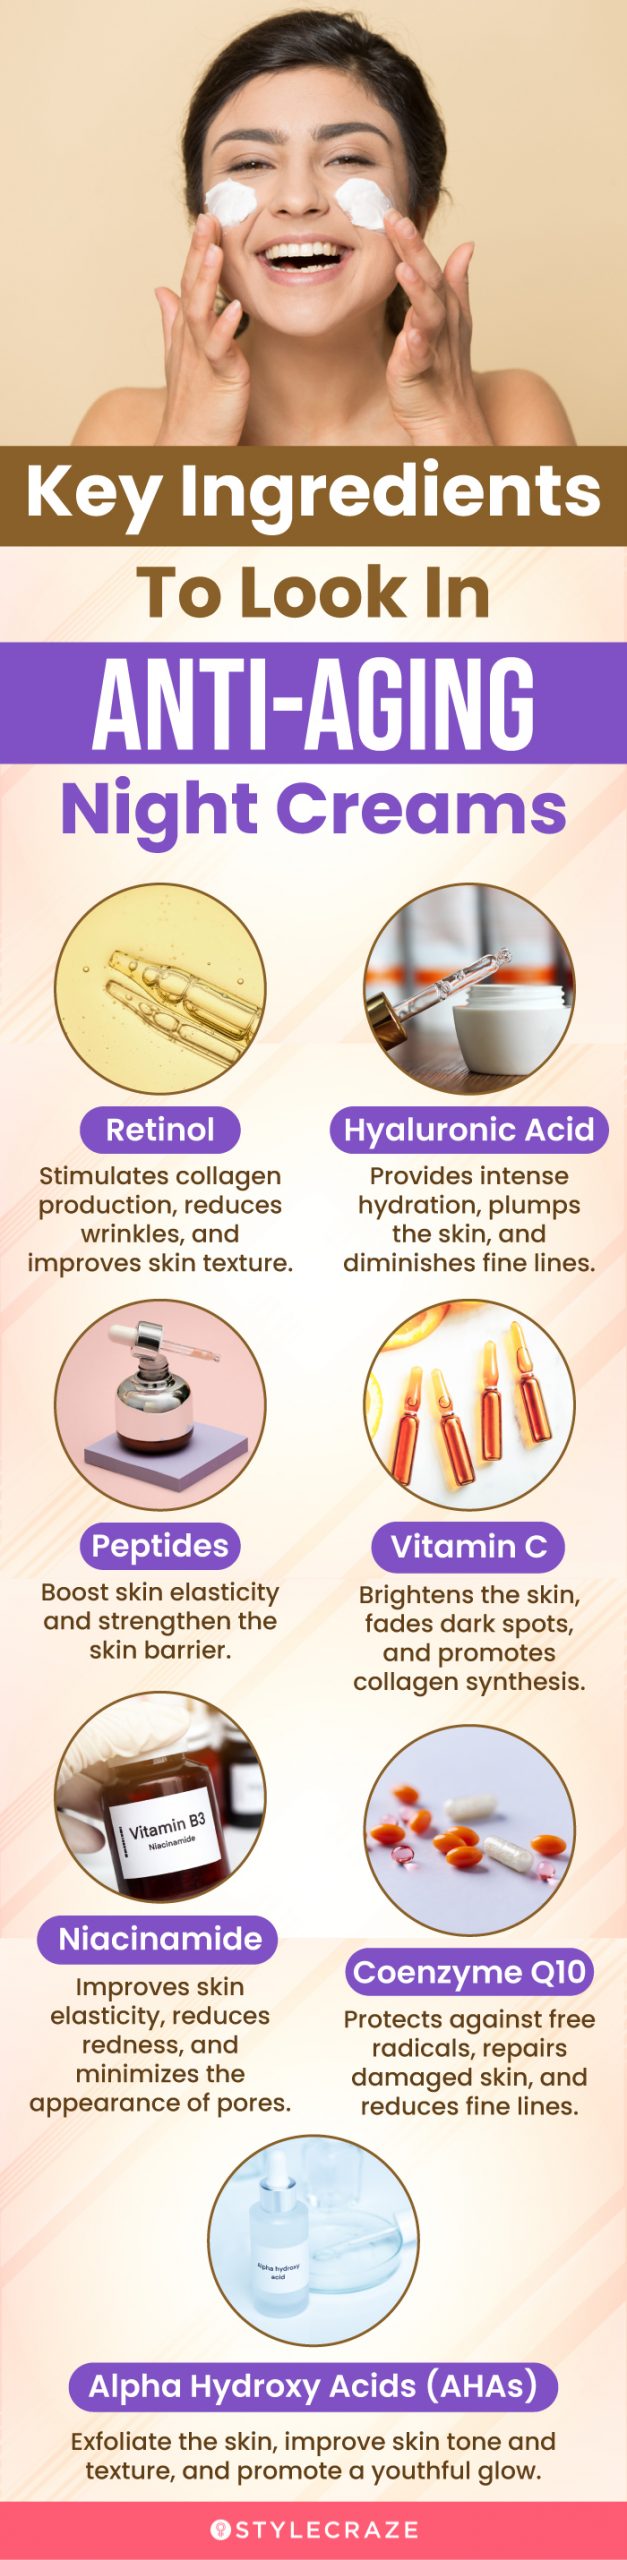 Key Ingredients To Look In Anti-Aging Night Creams (infographic)